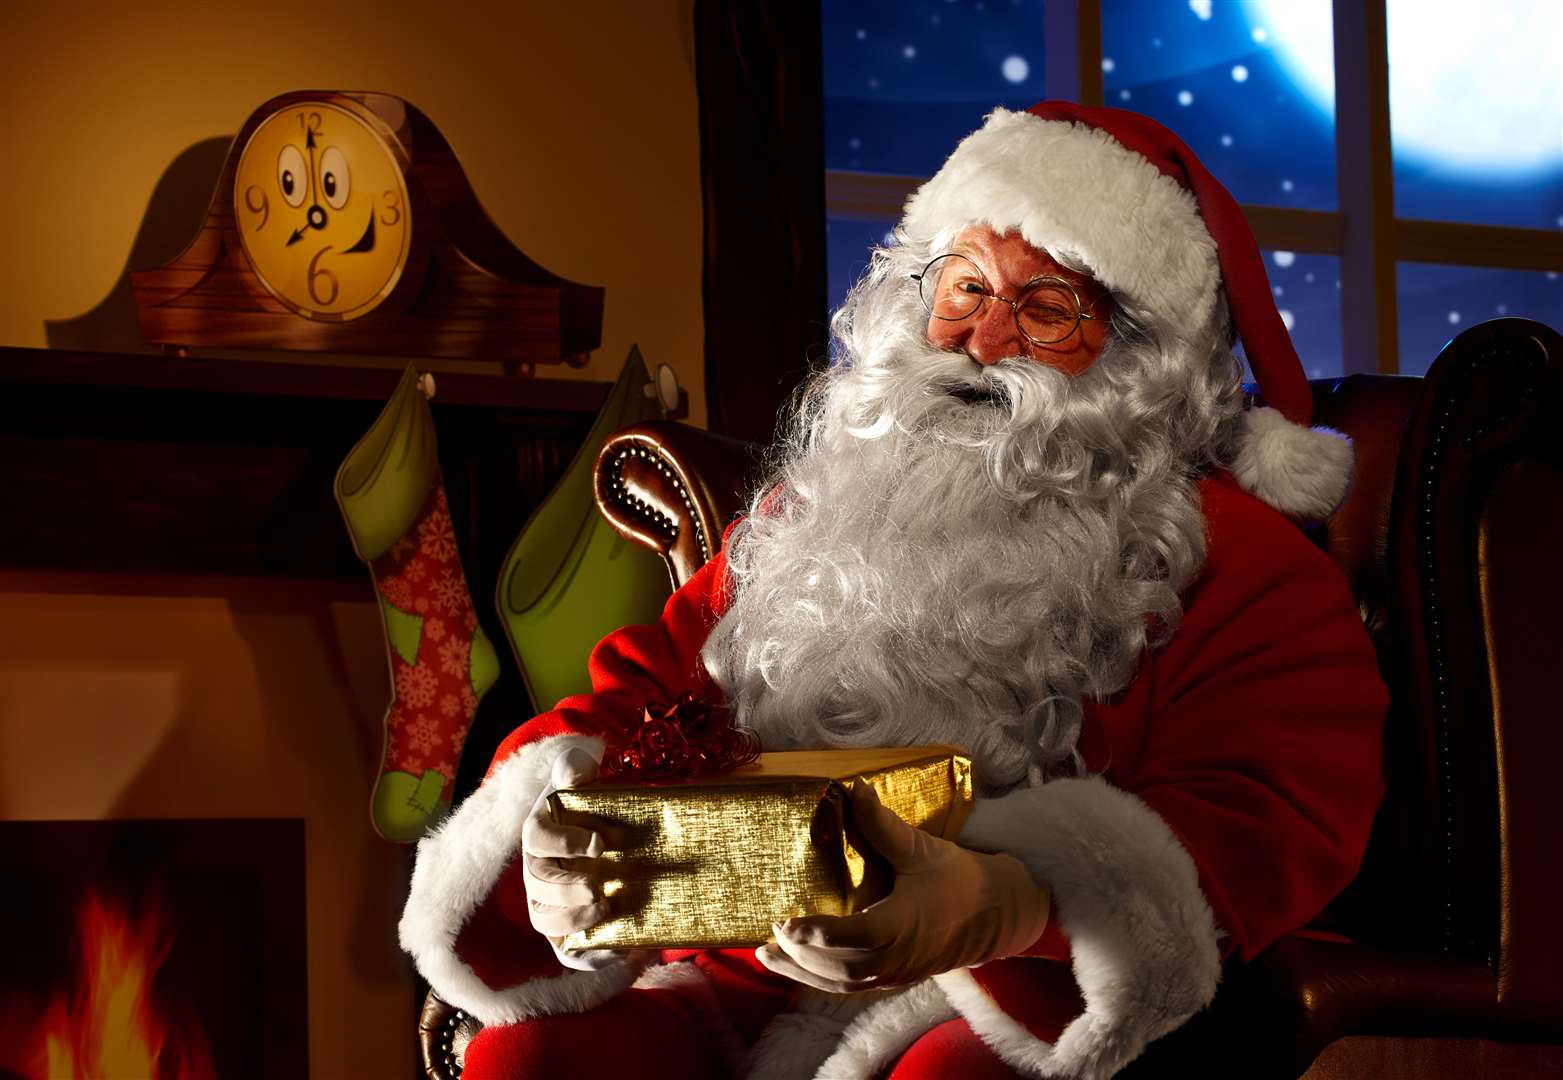 The elves can report back to Santa about the children they visit. Image: iStock.